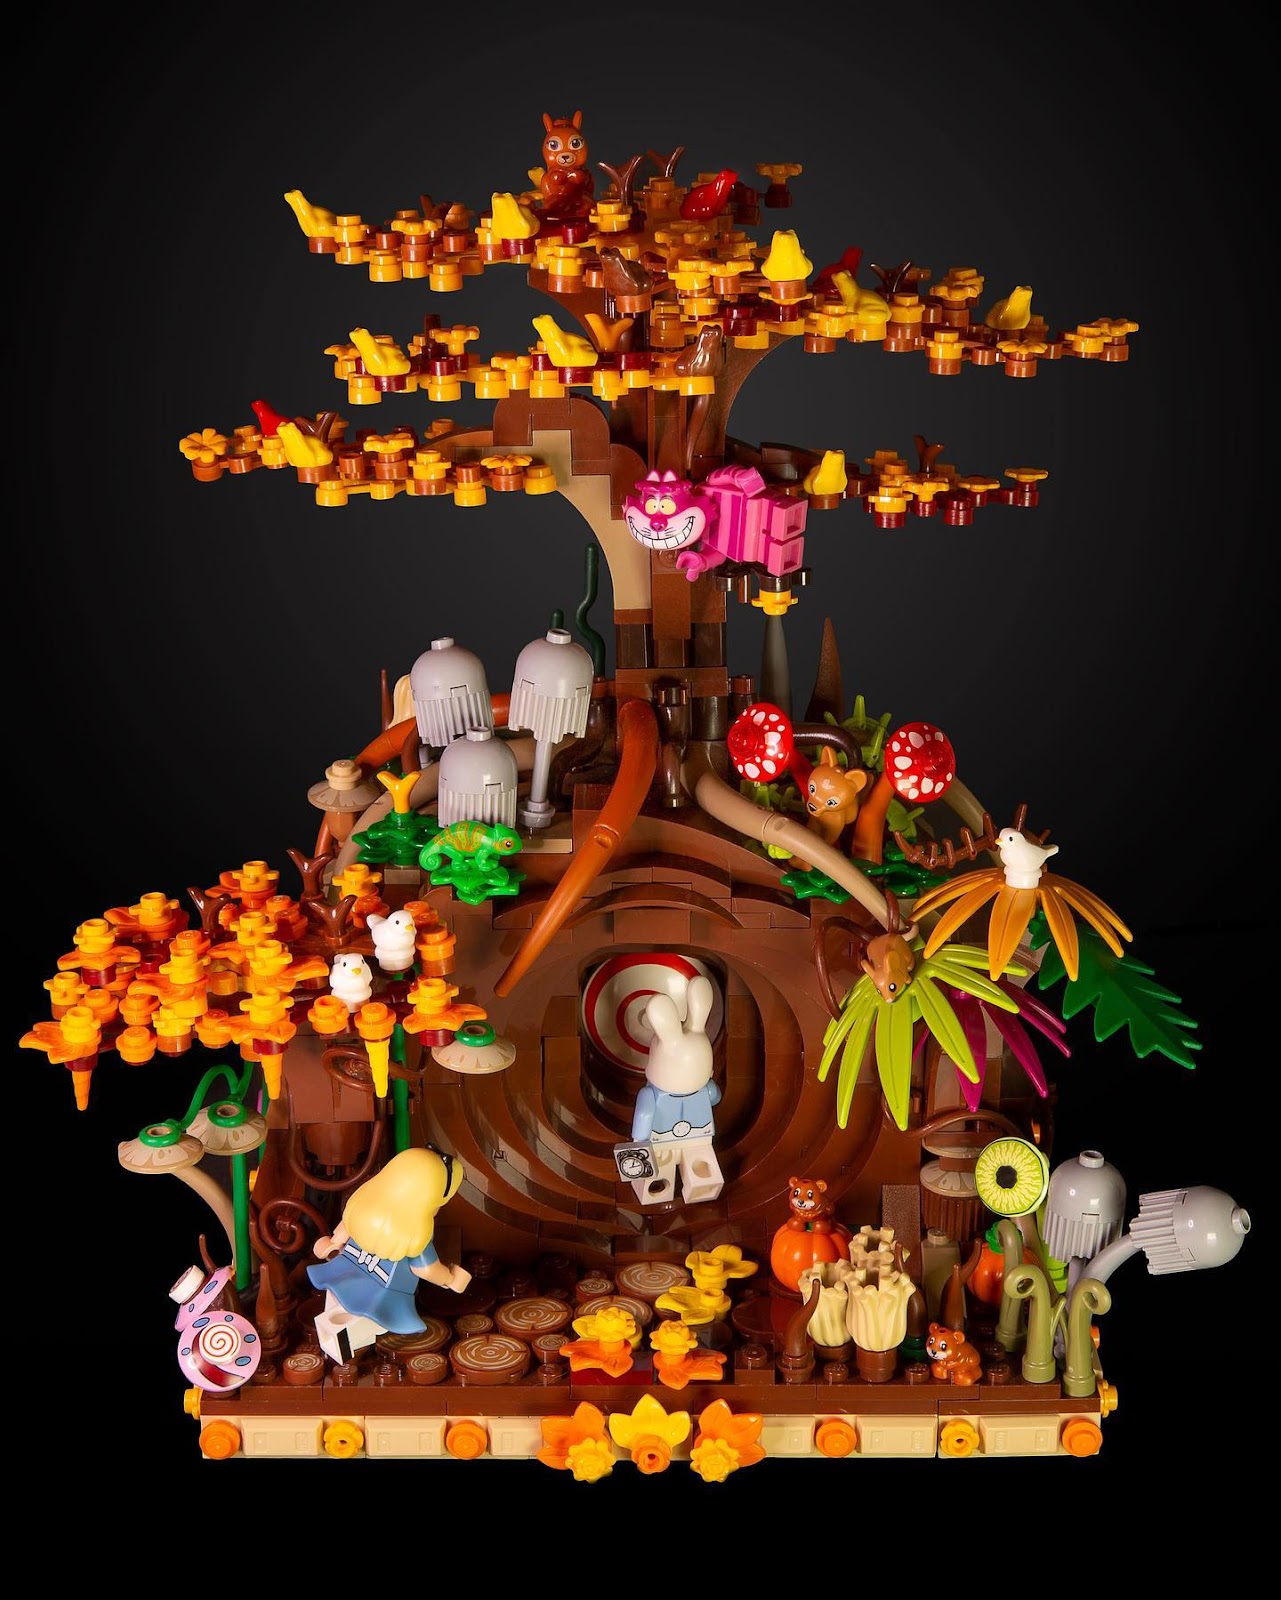 A photo of a colorful LEGO creation depicting a tree in autumn with a mysterious tunnel in it, a rabbit entering the tunnel, and Alice and the Cheshire Cat looking on